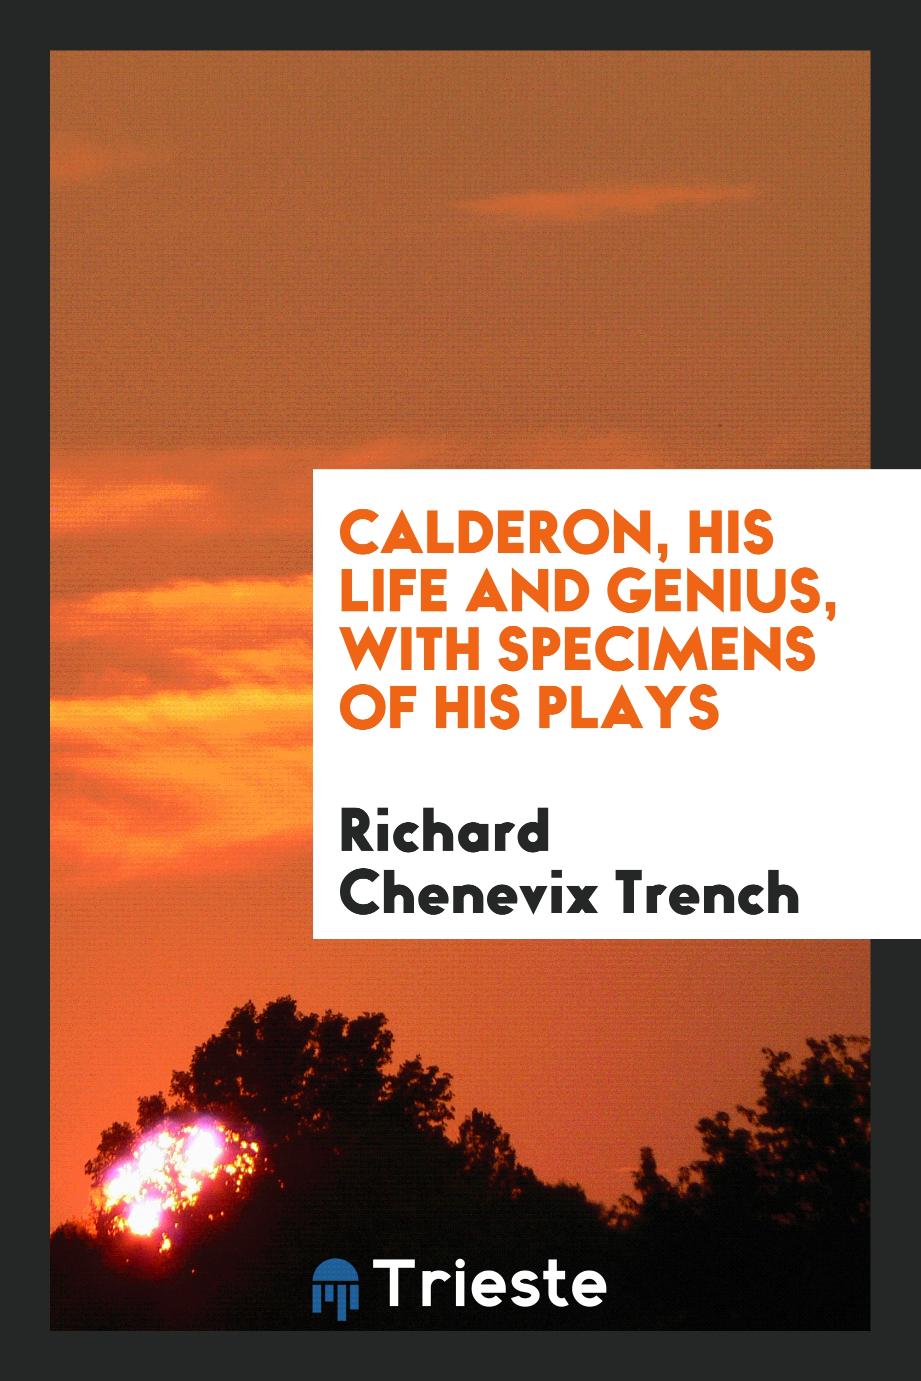 Calderon, his life and genius, with specimens of his plays